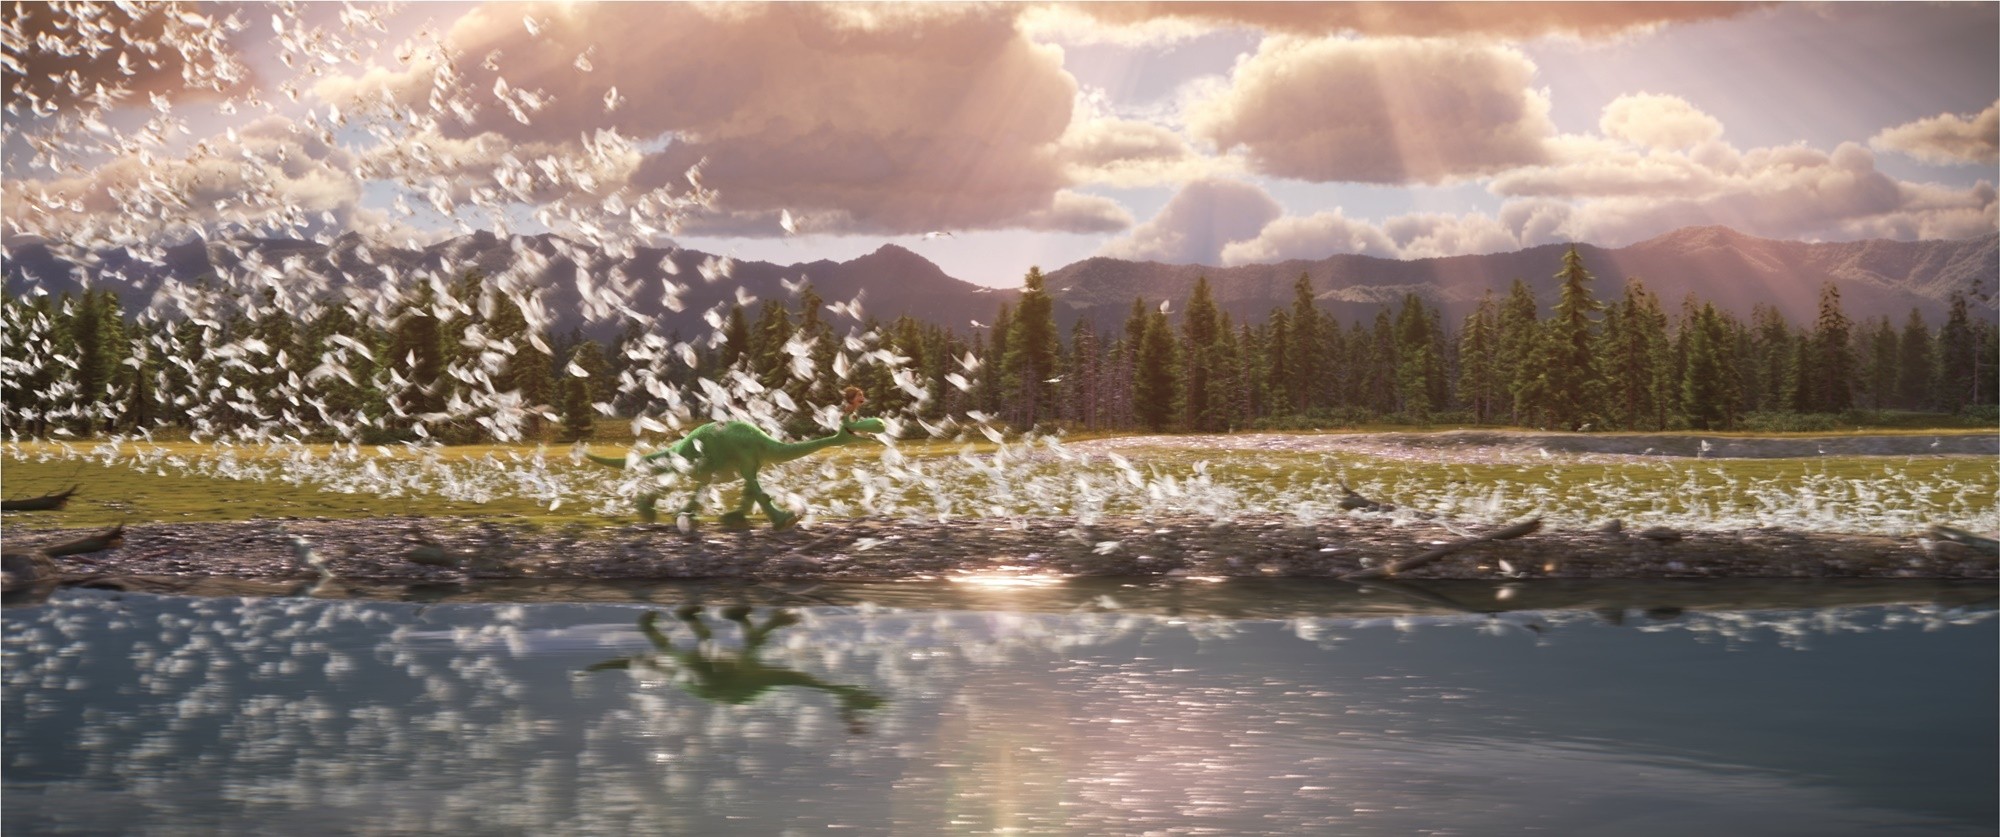 A scene from Walt Disney Pictures' The Good Dinosaur (2015)